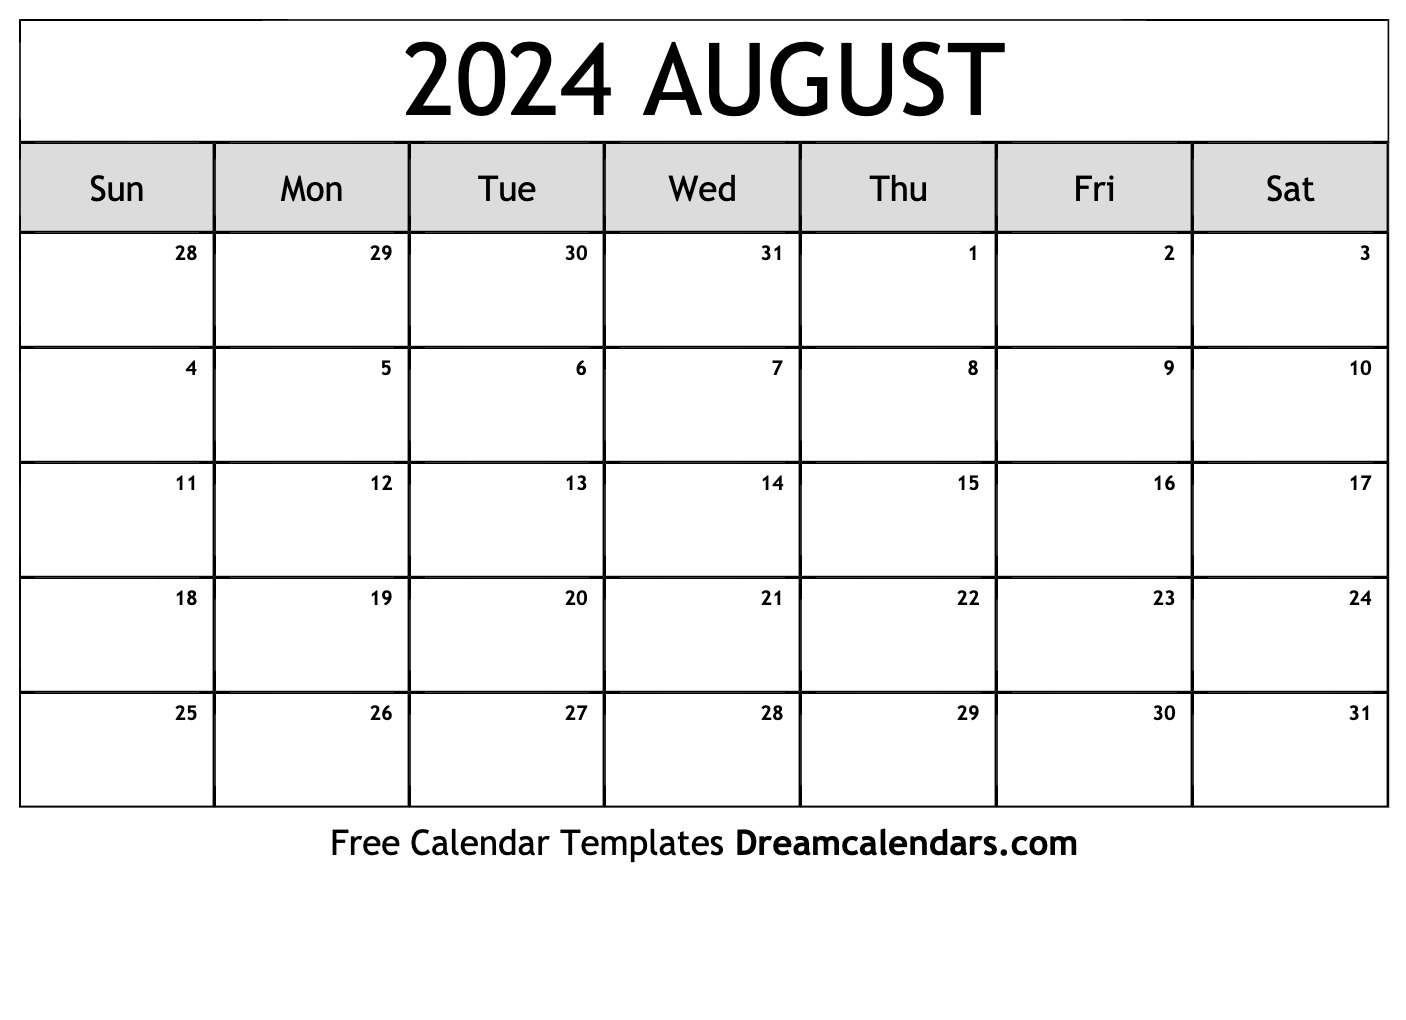 August 2024 Calendar | Free Blank Printable With Holidays for June-August 2024 Calendar Printable